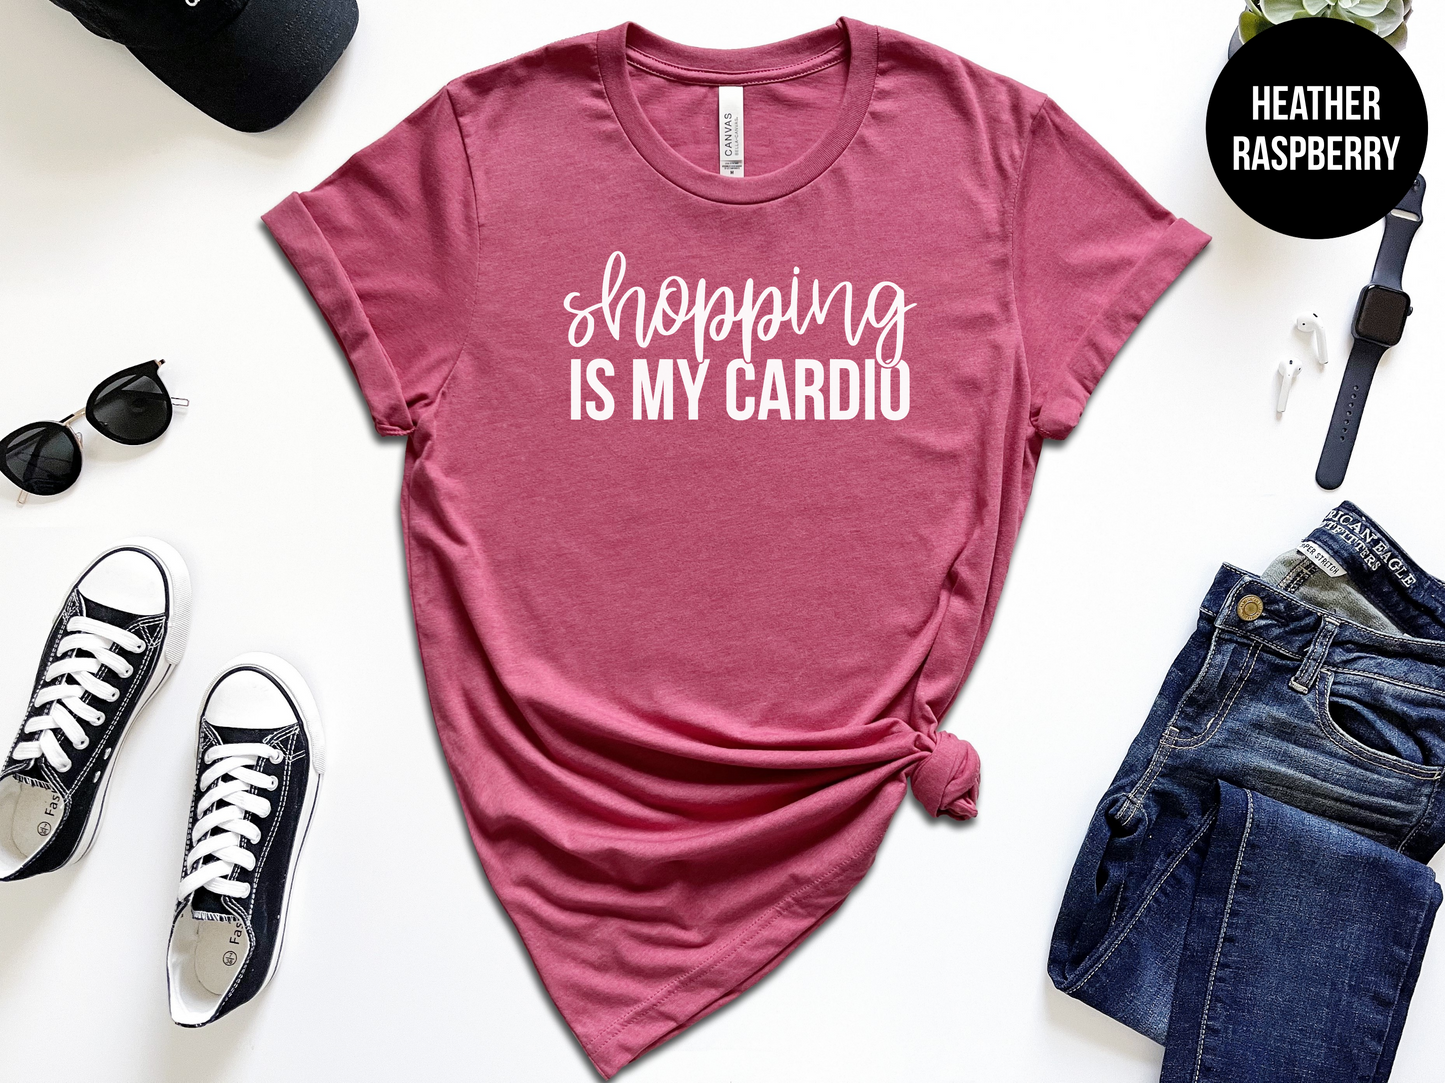 Shopping Is My Cardio